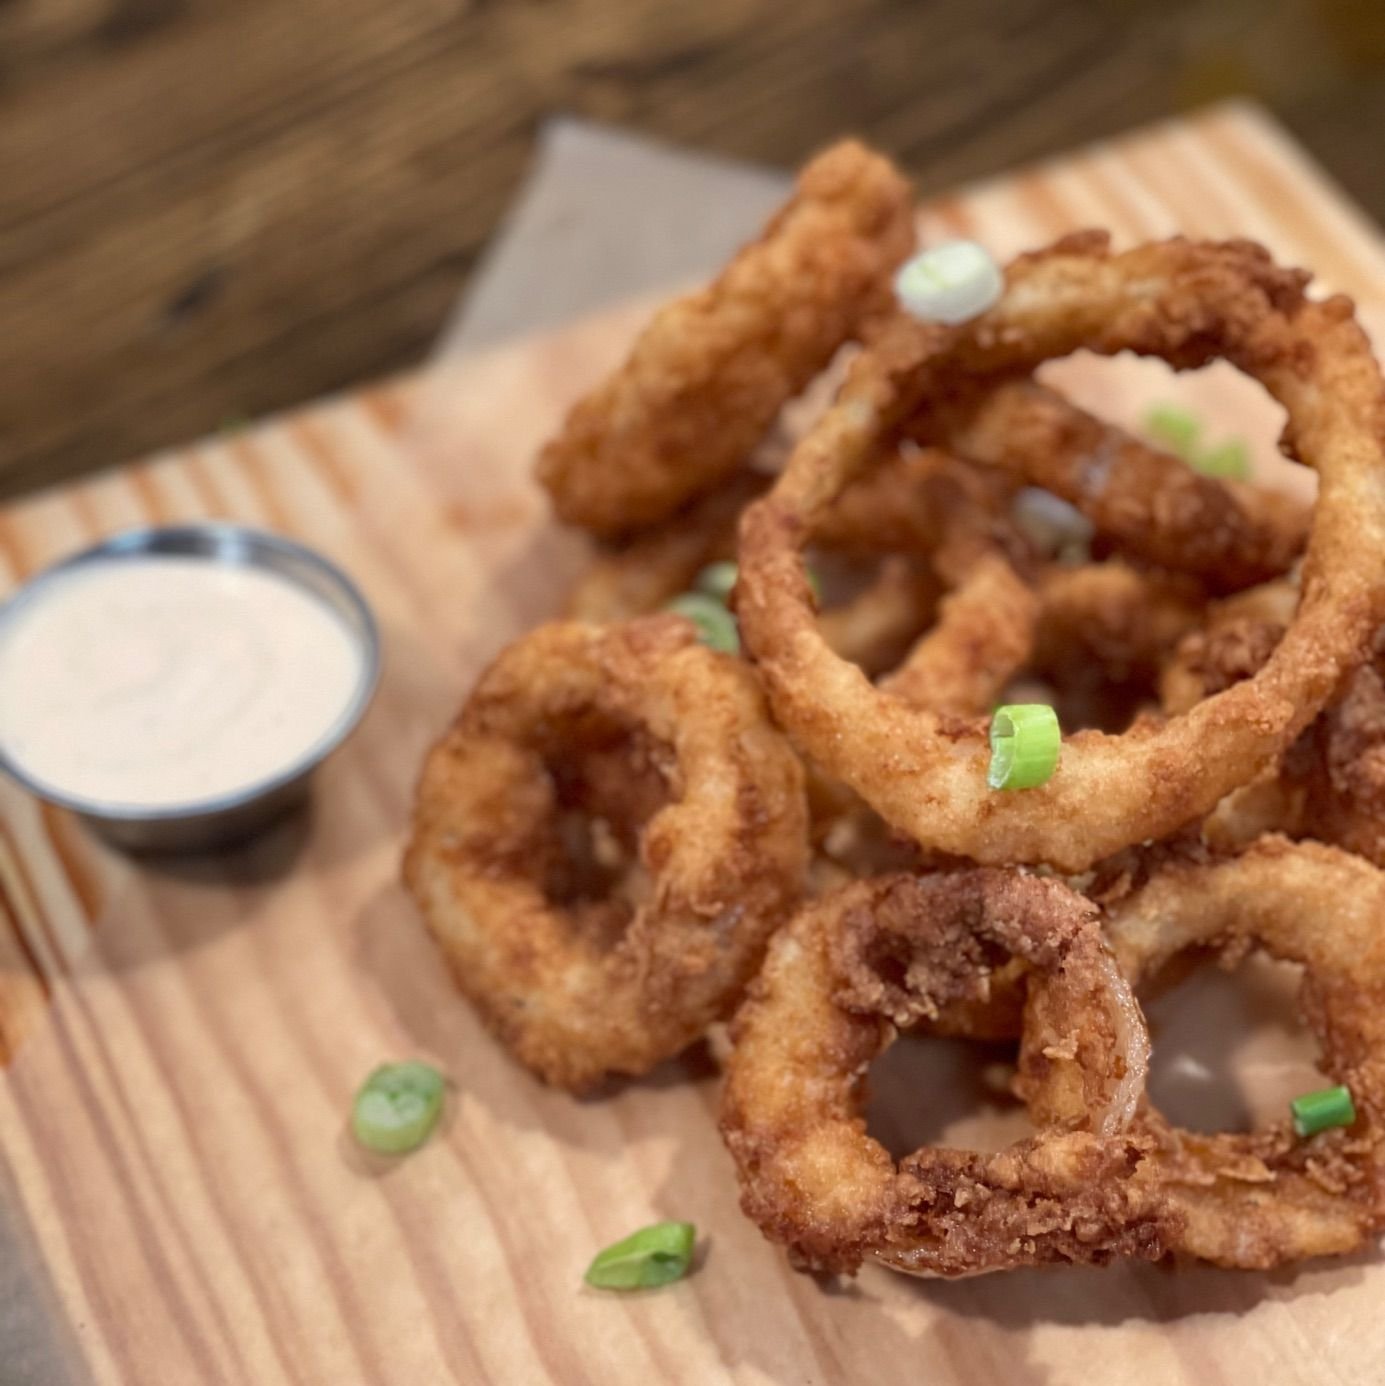 Halo Tower Onion Rings